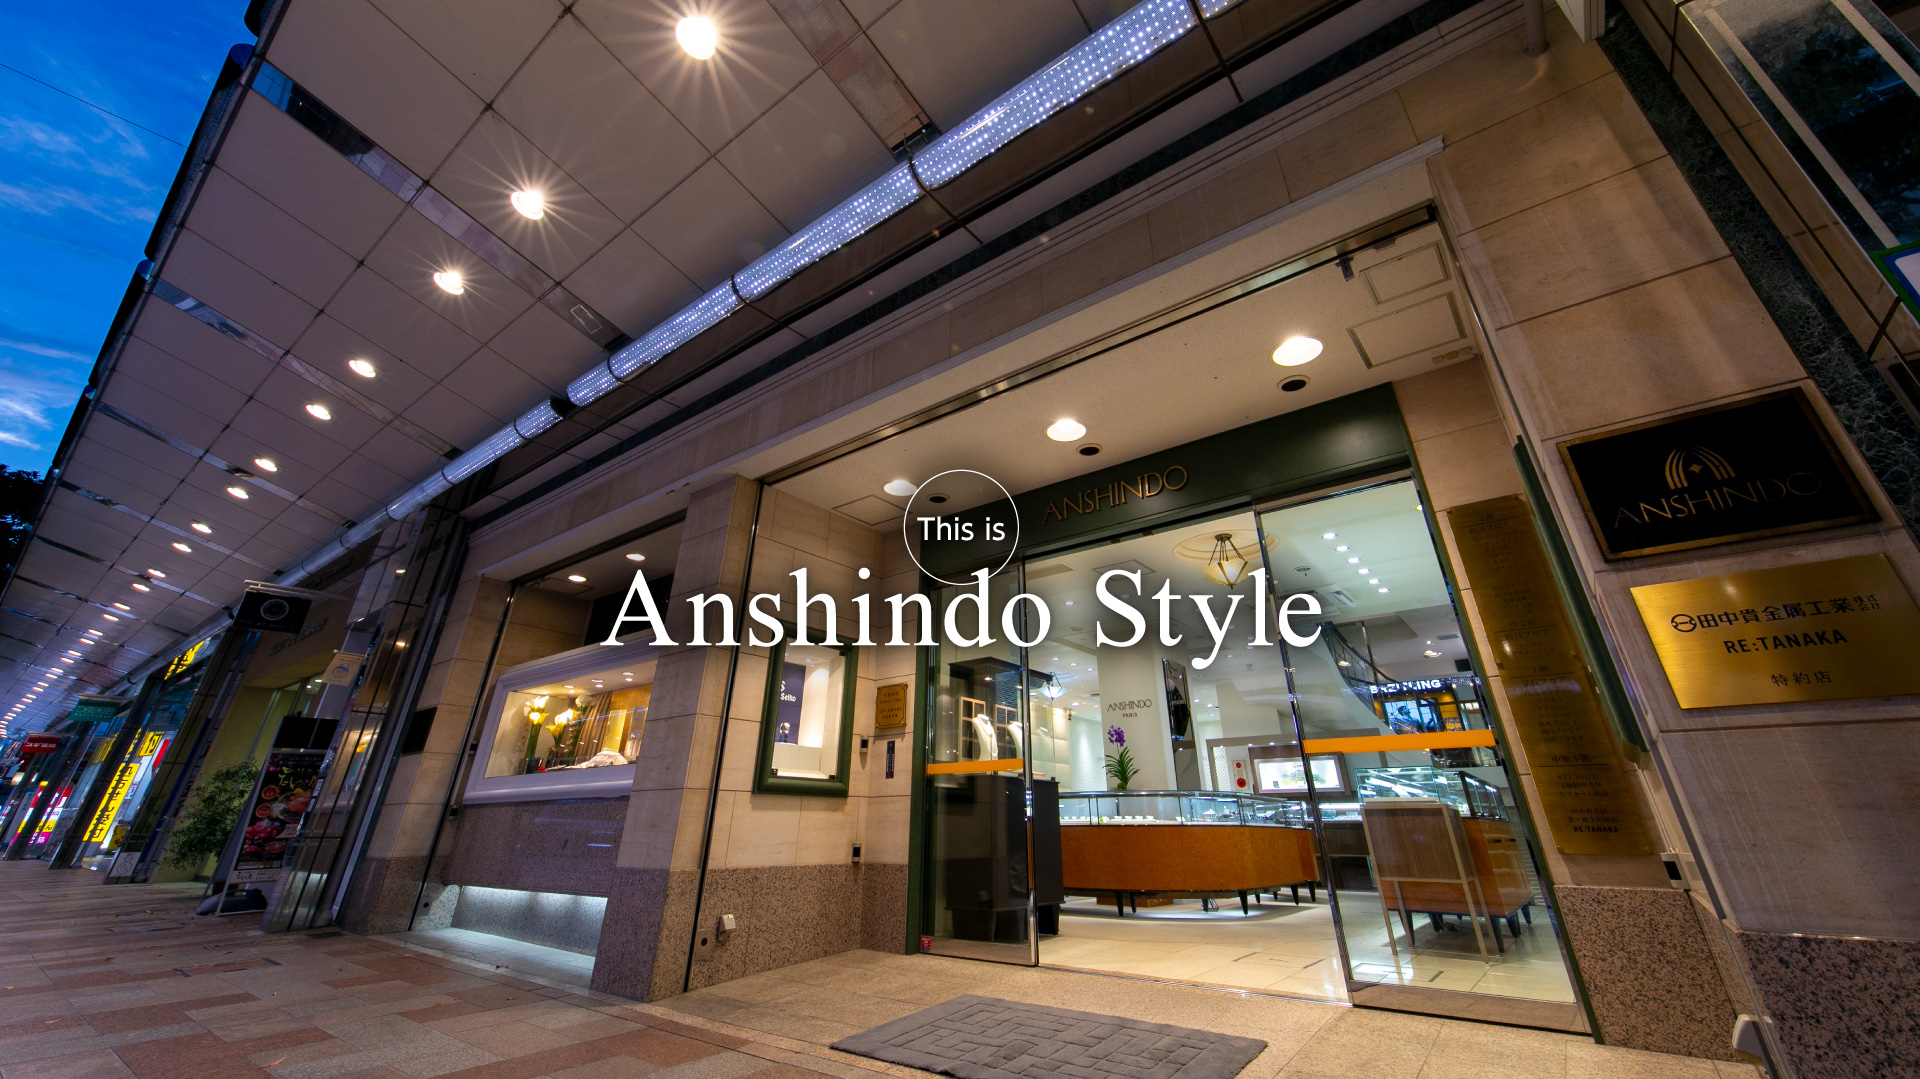 This is Anshindo Style